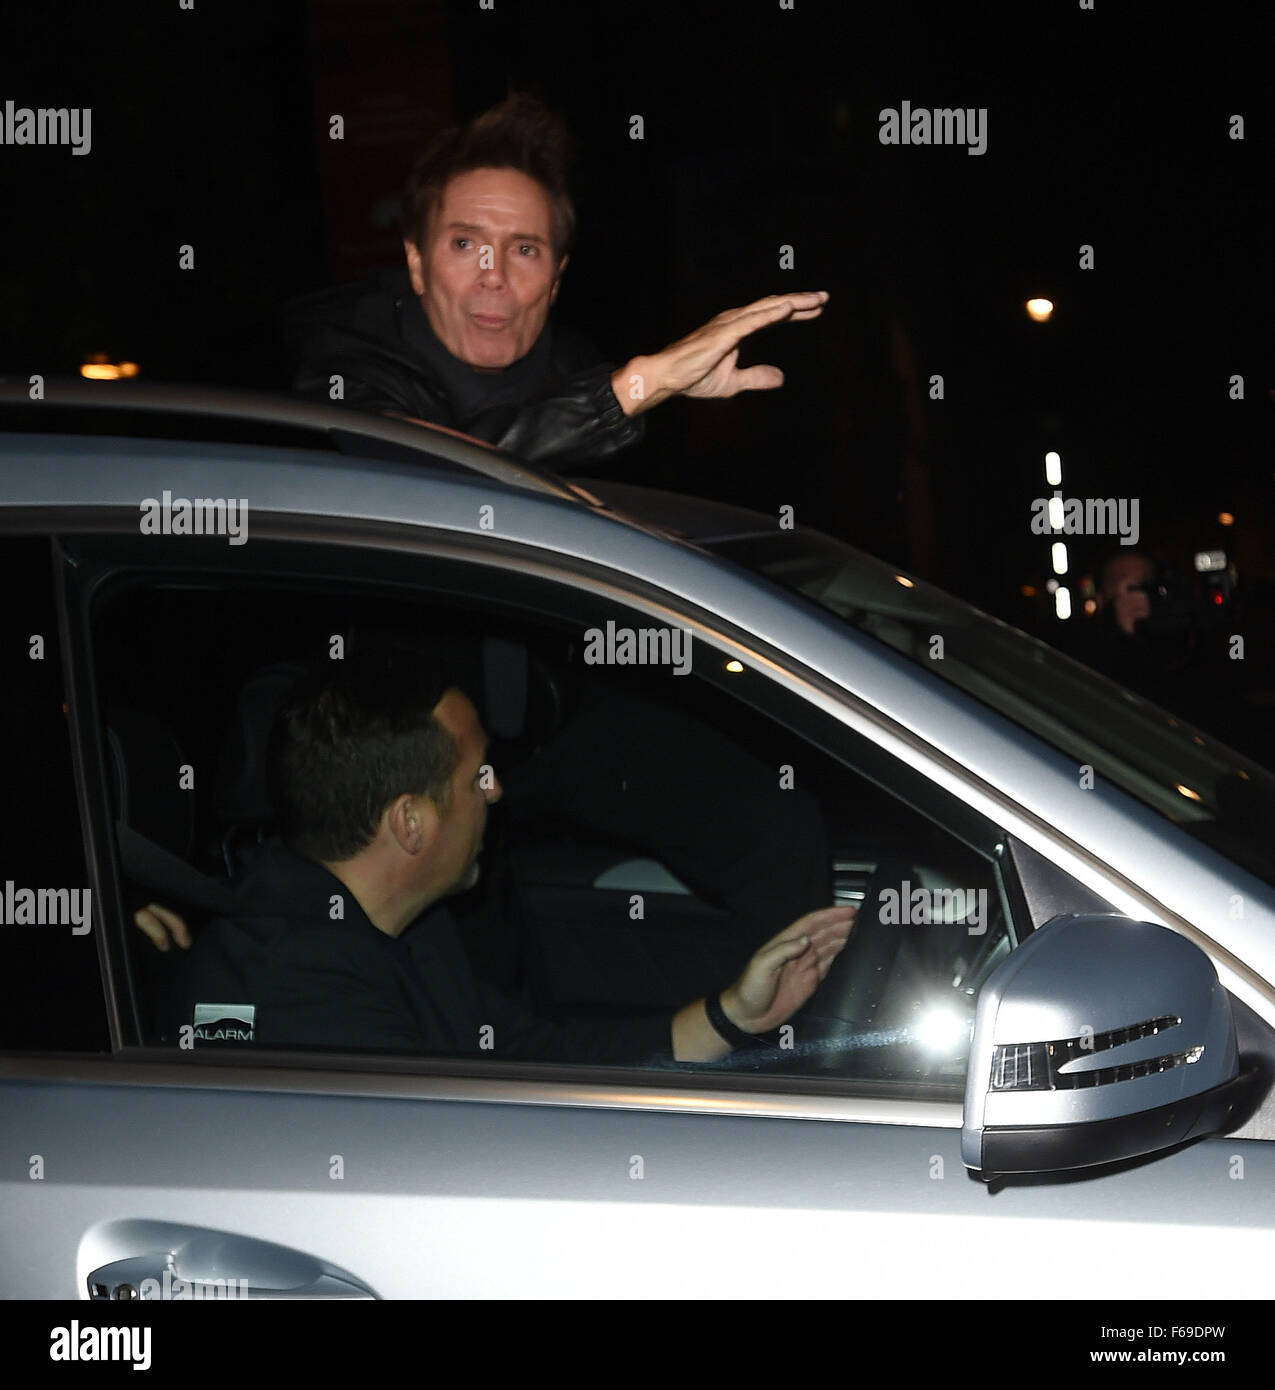 Pop singer Cliff Richard seen leaving the Royal Albert Hall and arriving at his London hotel. Cliff, who just turned 75 years old, was seen greeting his fans through the sun roof of his vehicle  Featuring: Sir Cliff Richard Where: London, United Kingdom W Stock Photo